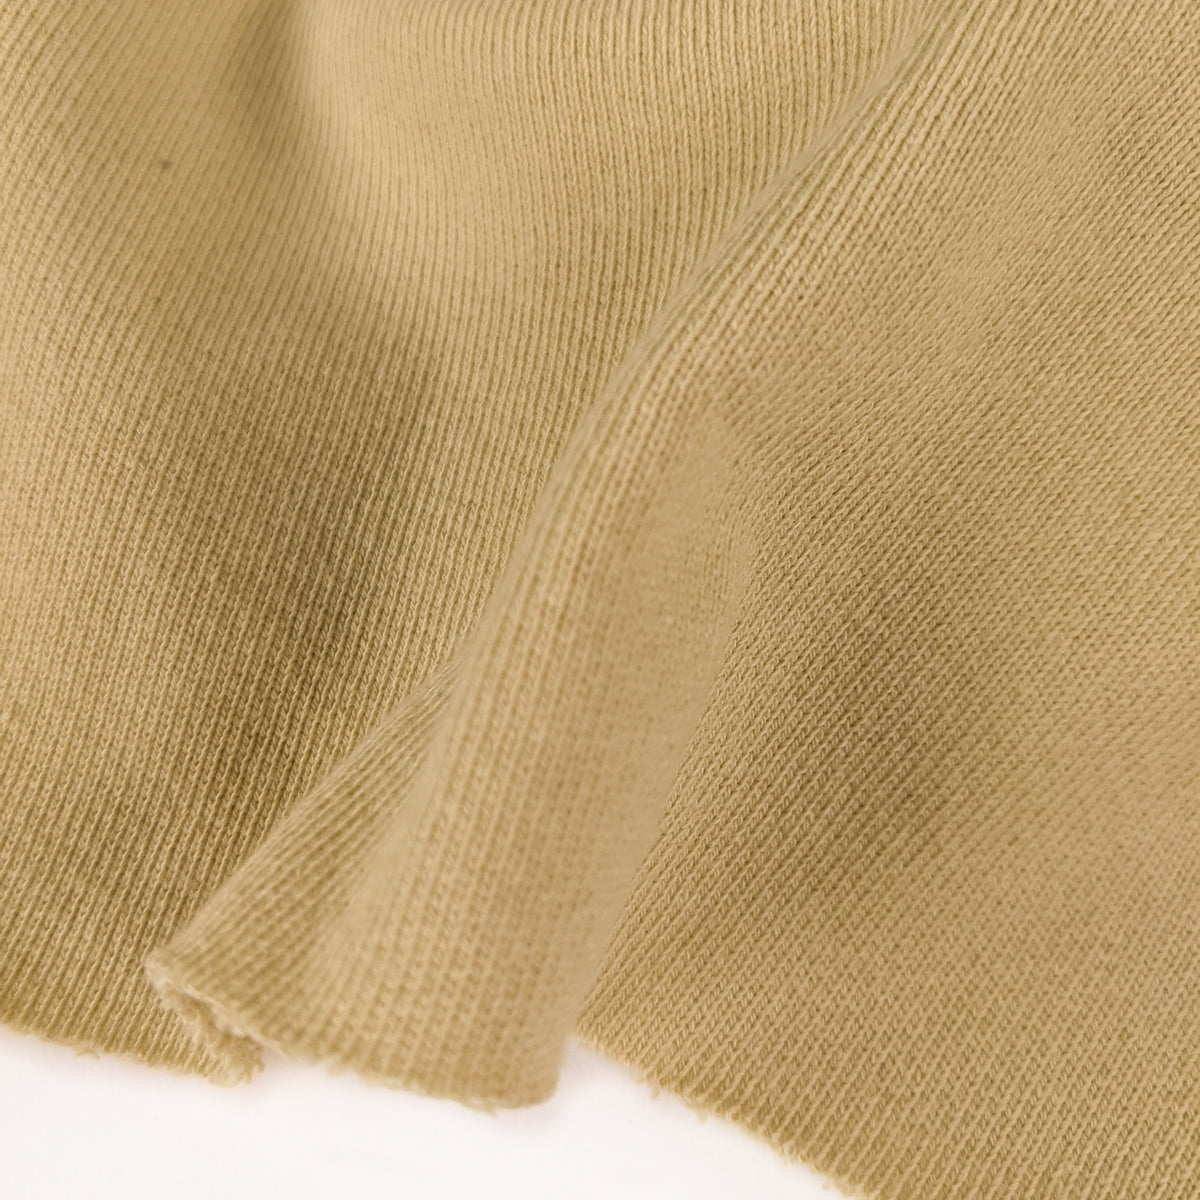 Remnant: 100% Organic Cotton Large Loop French Terry Knit - Mellow (1.5 metres)